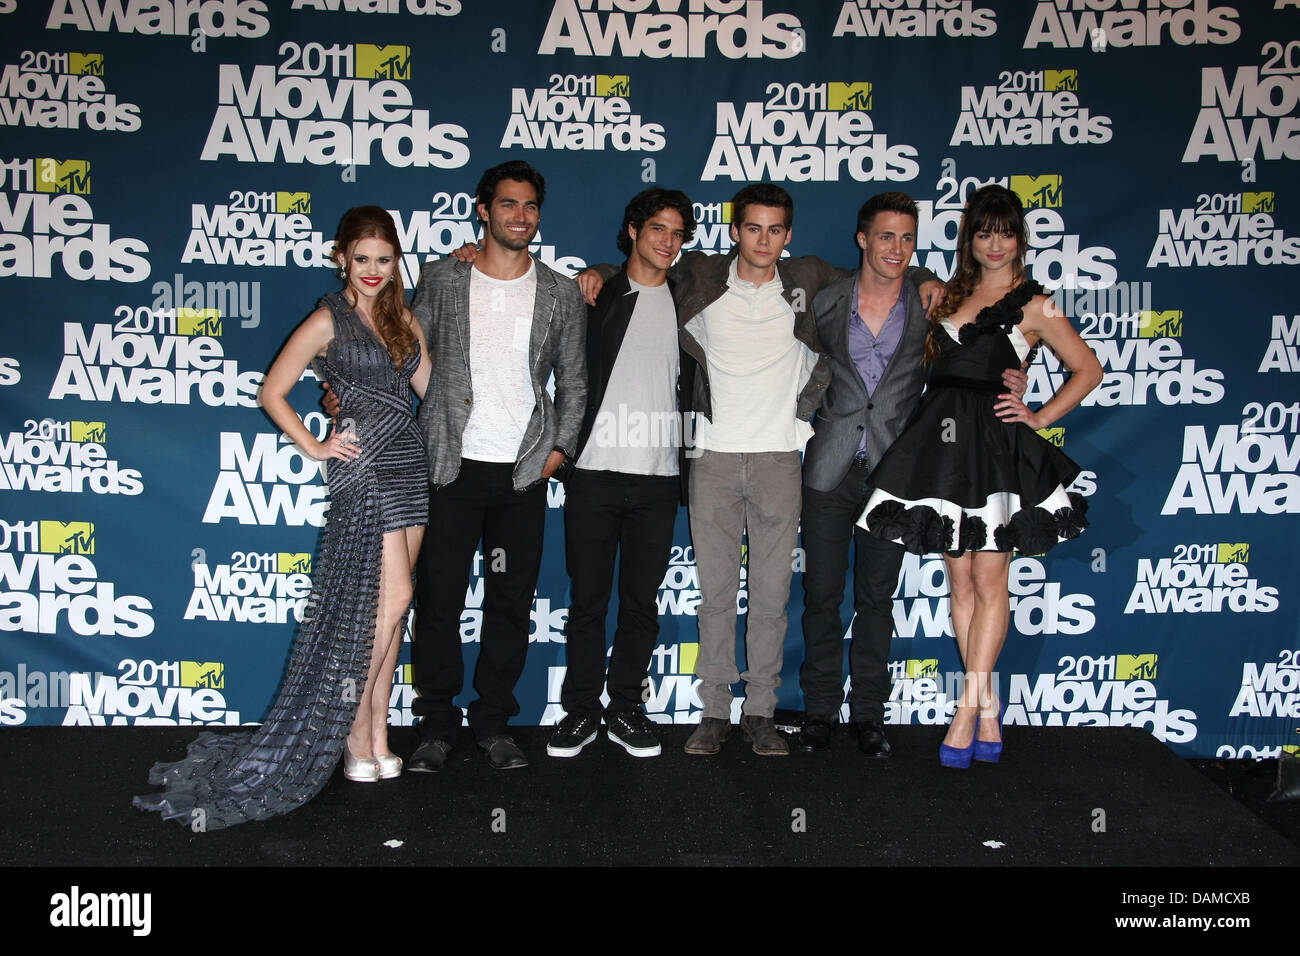 Actors Tyler Hoechlin (l-r), Tyler Posey, Dylan O'Brien, Holland Roden, Crystal Reed, and Colton Haynes of 'Teen Wolf' pose in the photo press room of the MTV Movie Awards at Universal Studio's Gibson Amphitheatre in Universal City/Los Angeles, USA, on 05 June 2011. Photo: Hubert Boesl Stock Photo